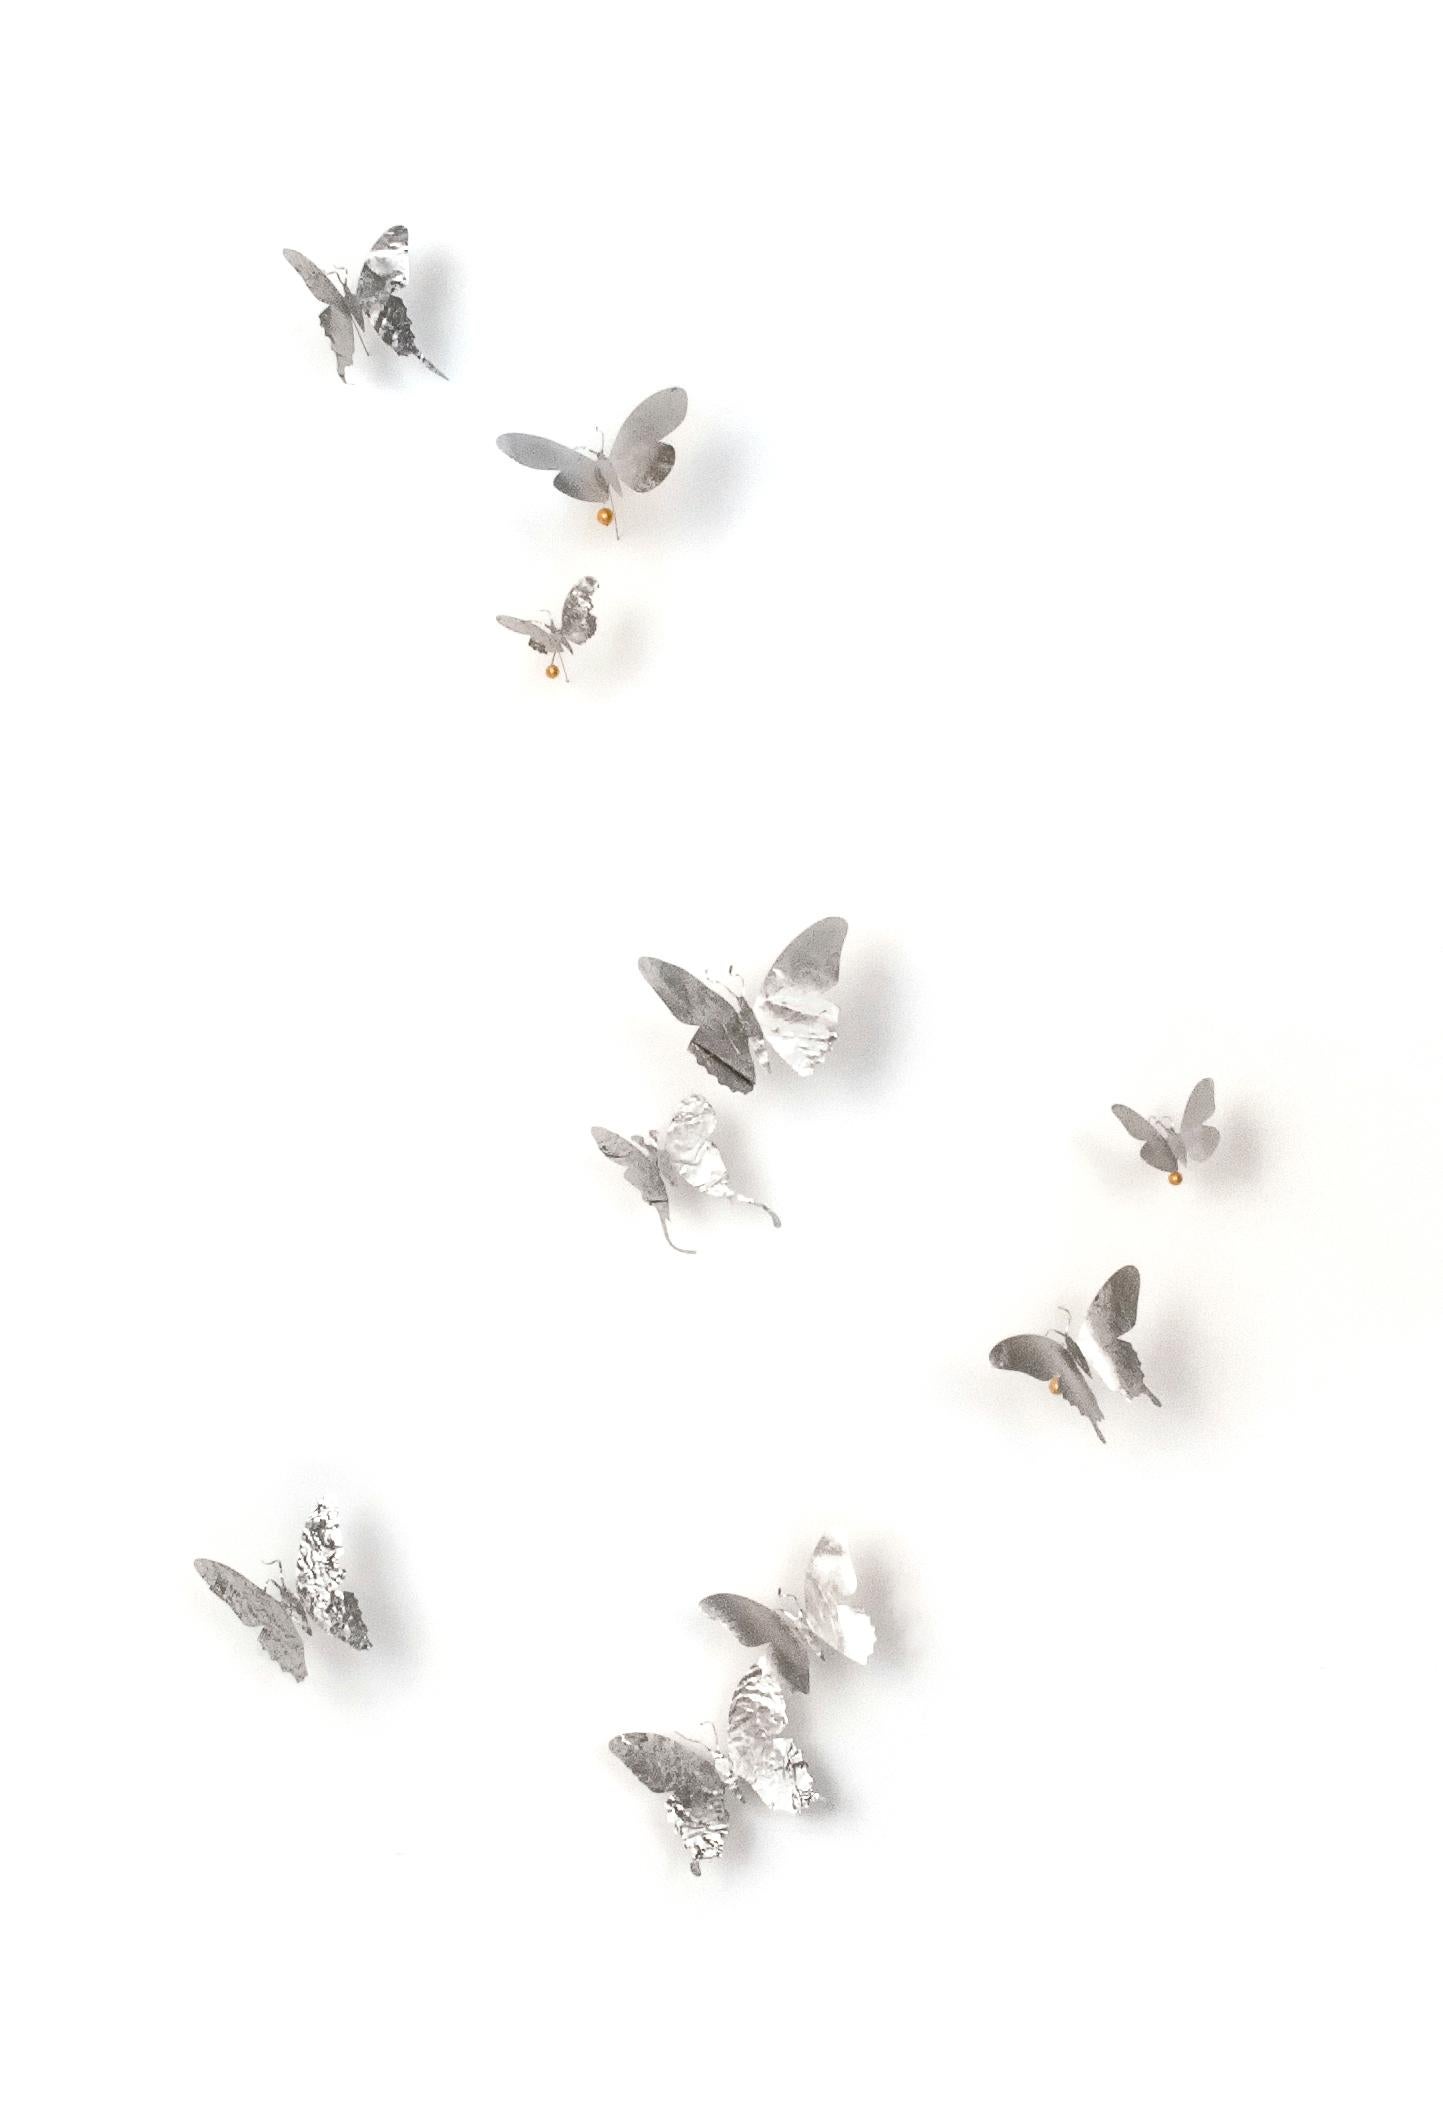 medium: aluminum (found cans), wire, white Flashe paint

Available in multiple color/finish options (inquire with gallery).
Installations are made to order, sizes and shapes of butterflies vary. 
Unique, open edition.
Ships with installation